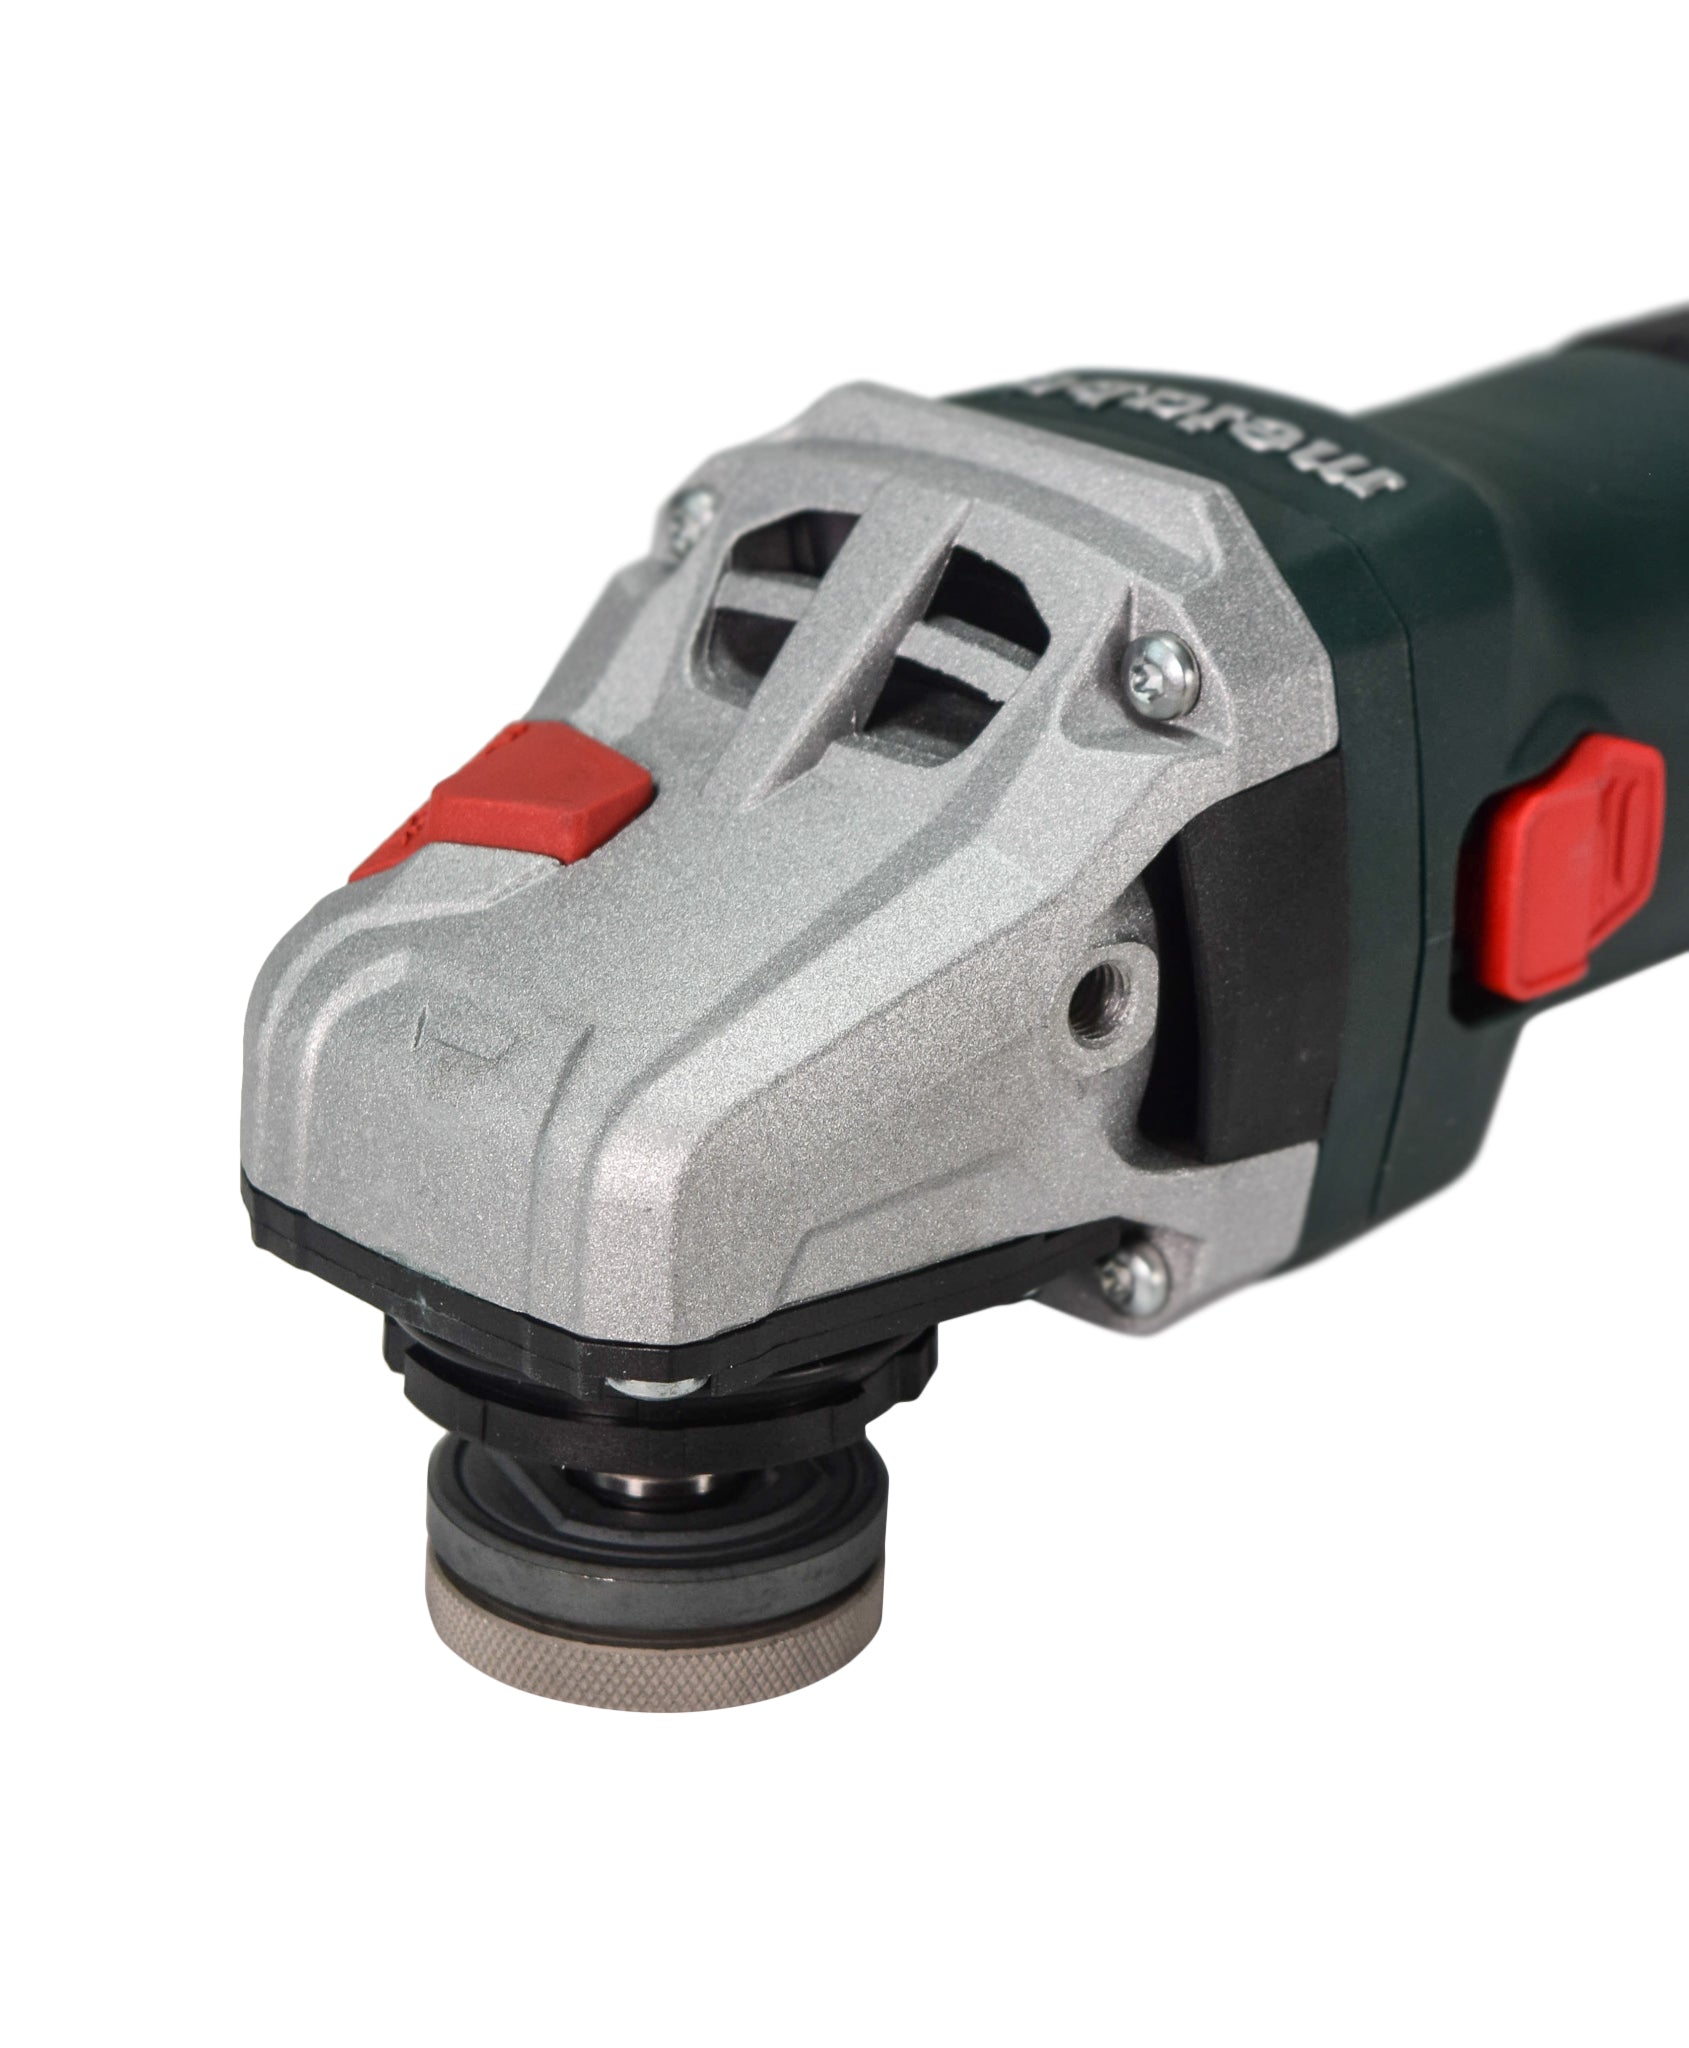 Metabo-603623420-4.5-inch-5-inch-Angle-Grinder-11-000-Rpm-11.0-Amps-with-Lock-on-image-5